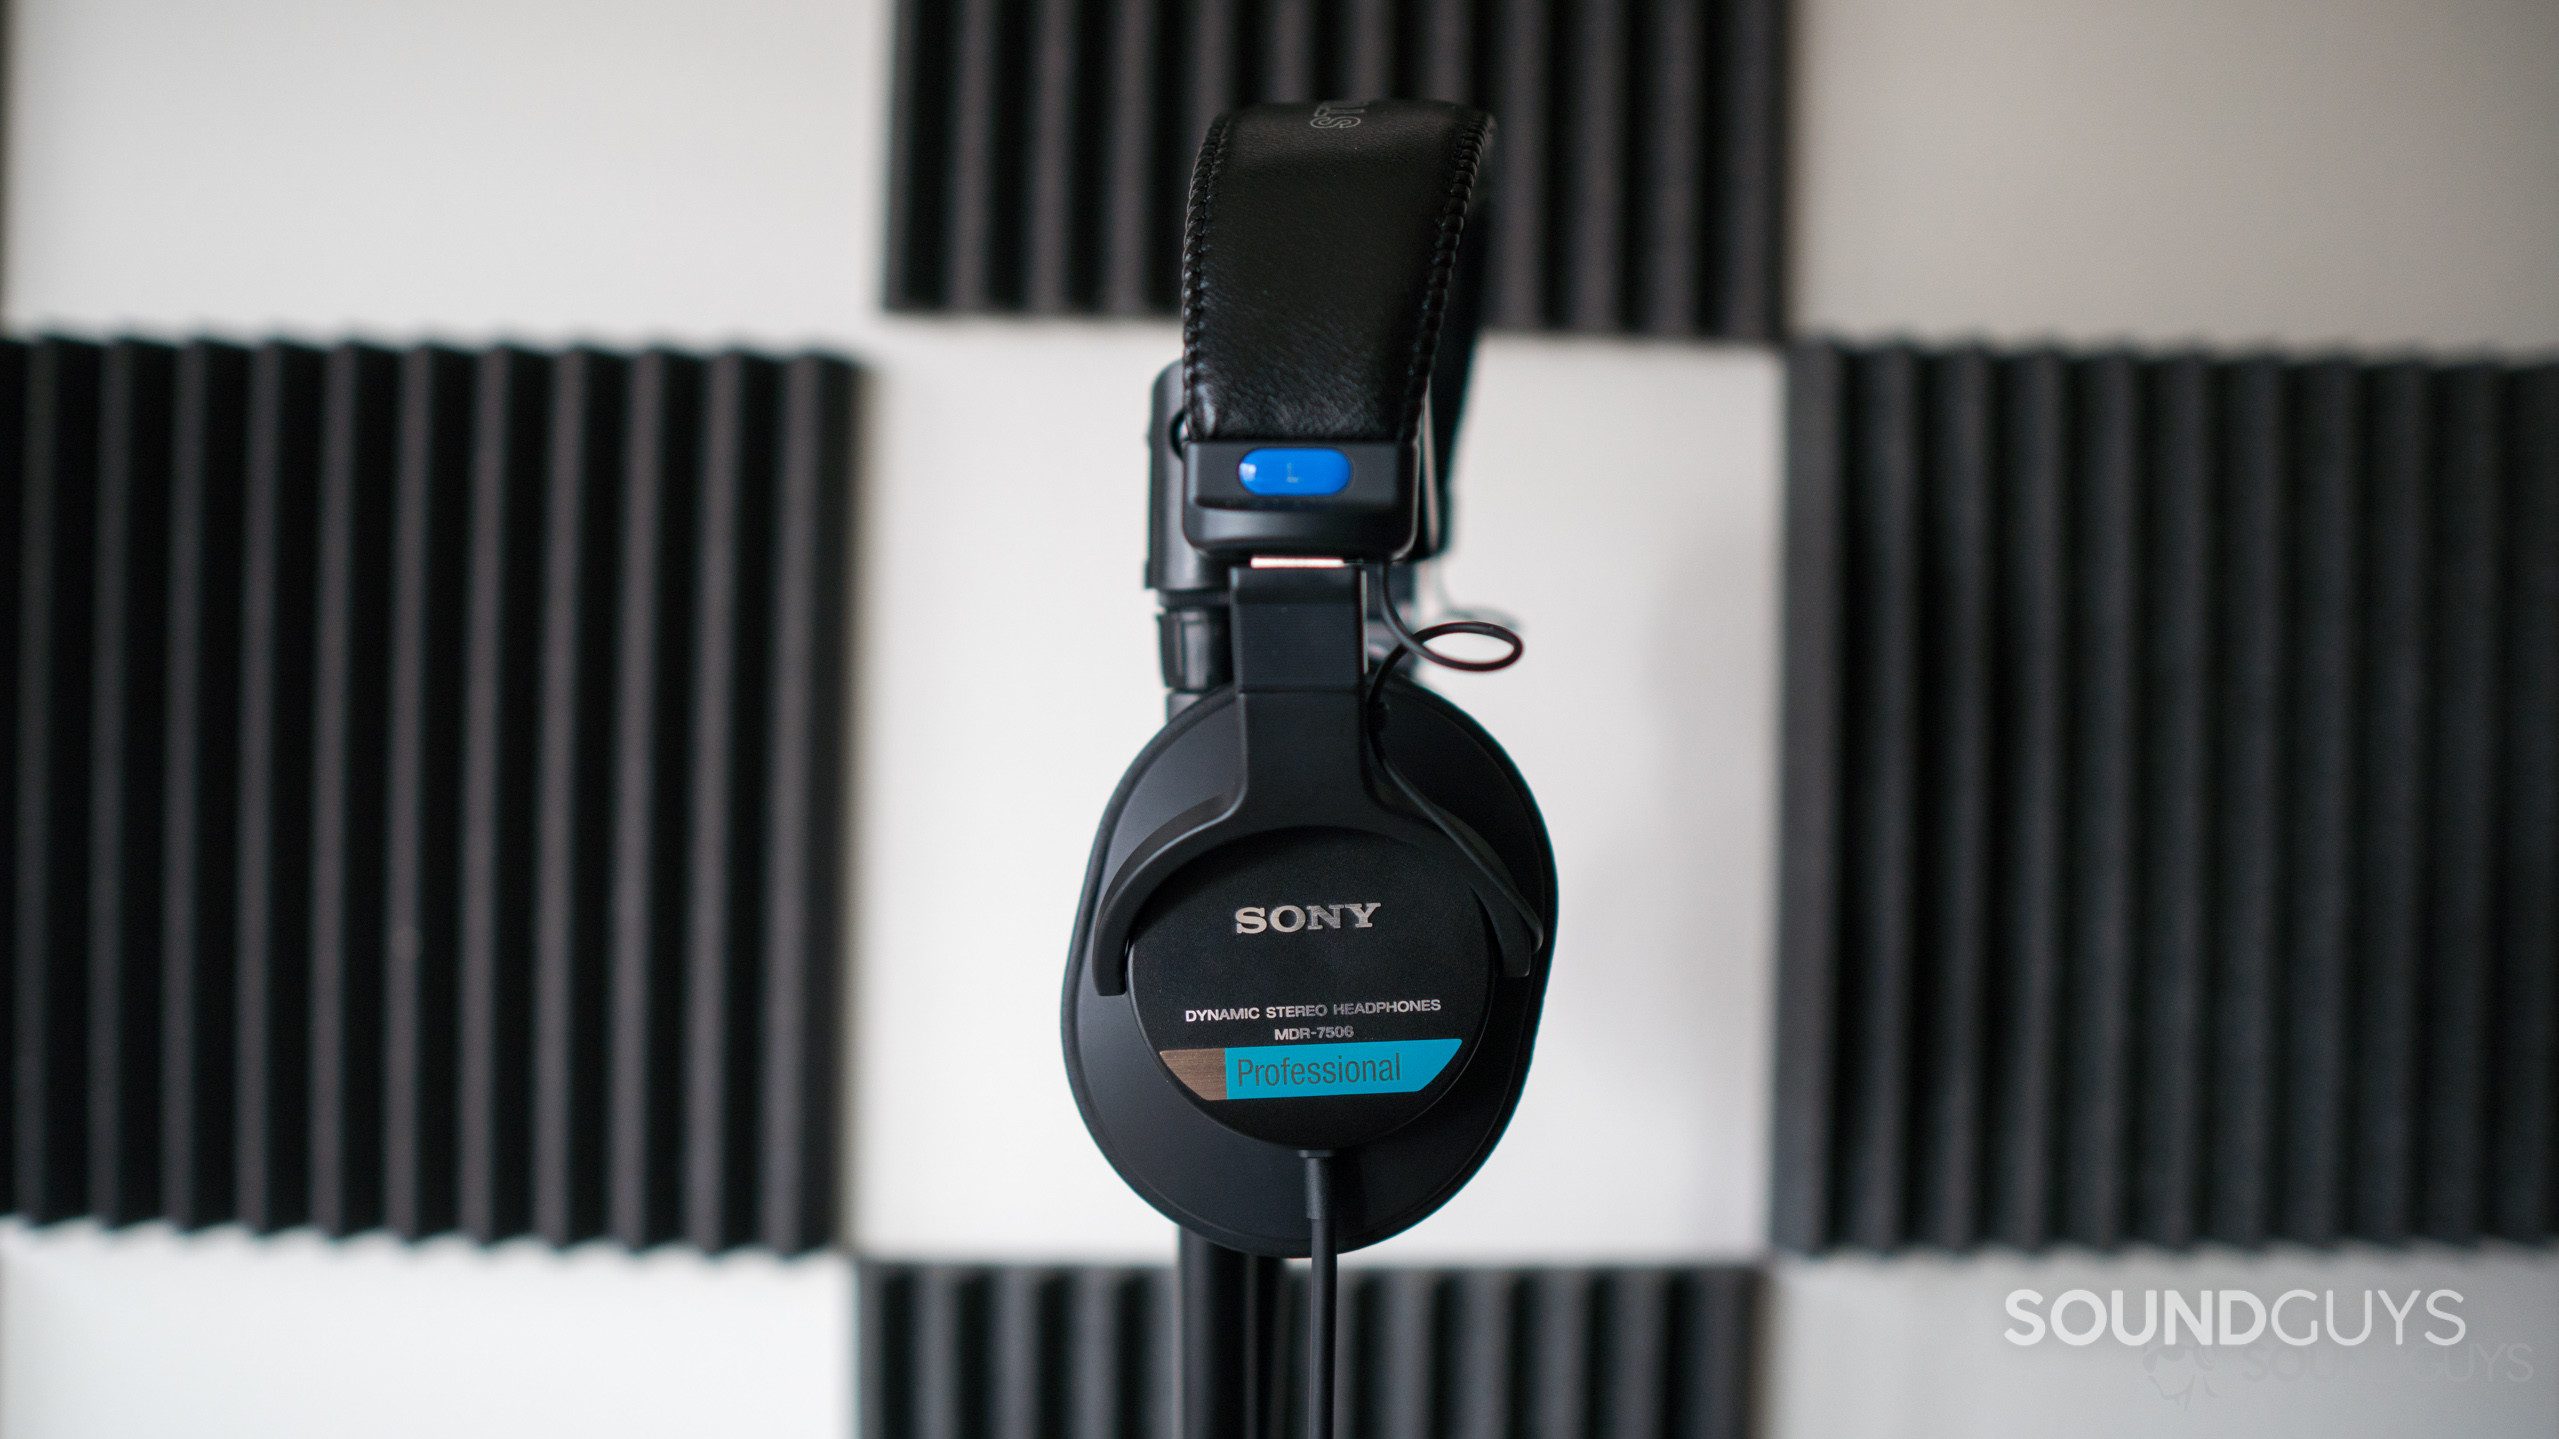 The Sony MDR 7506 rests on a microphone stand in a recording studio.